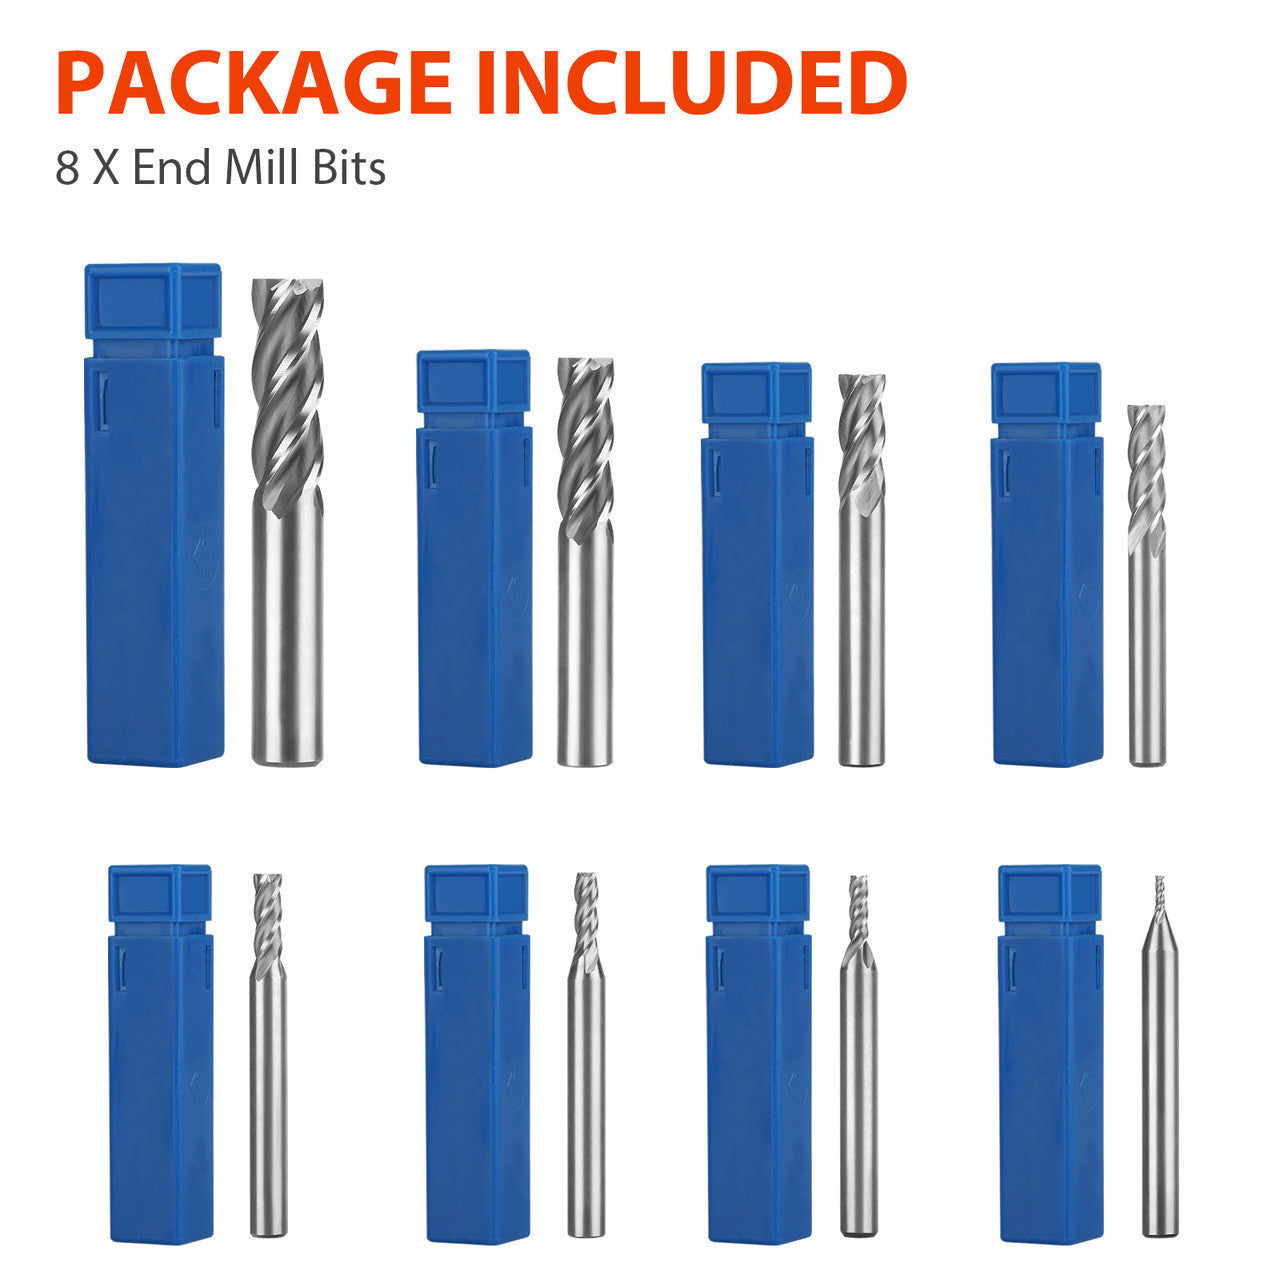 8 PCS Carbide End Mill Cutter, 8 in 1 Cutting Diameter--1/16", 1/8", 5/32", 3/16", 1/4", 5/16", 3/8", 1/2",with Negative Rake Angle and Large-core for Wood, Carbon Steel, Cast Iron, Titanium, Aluminum